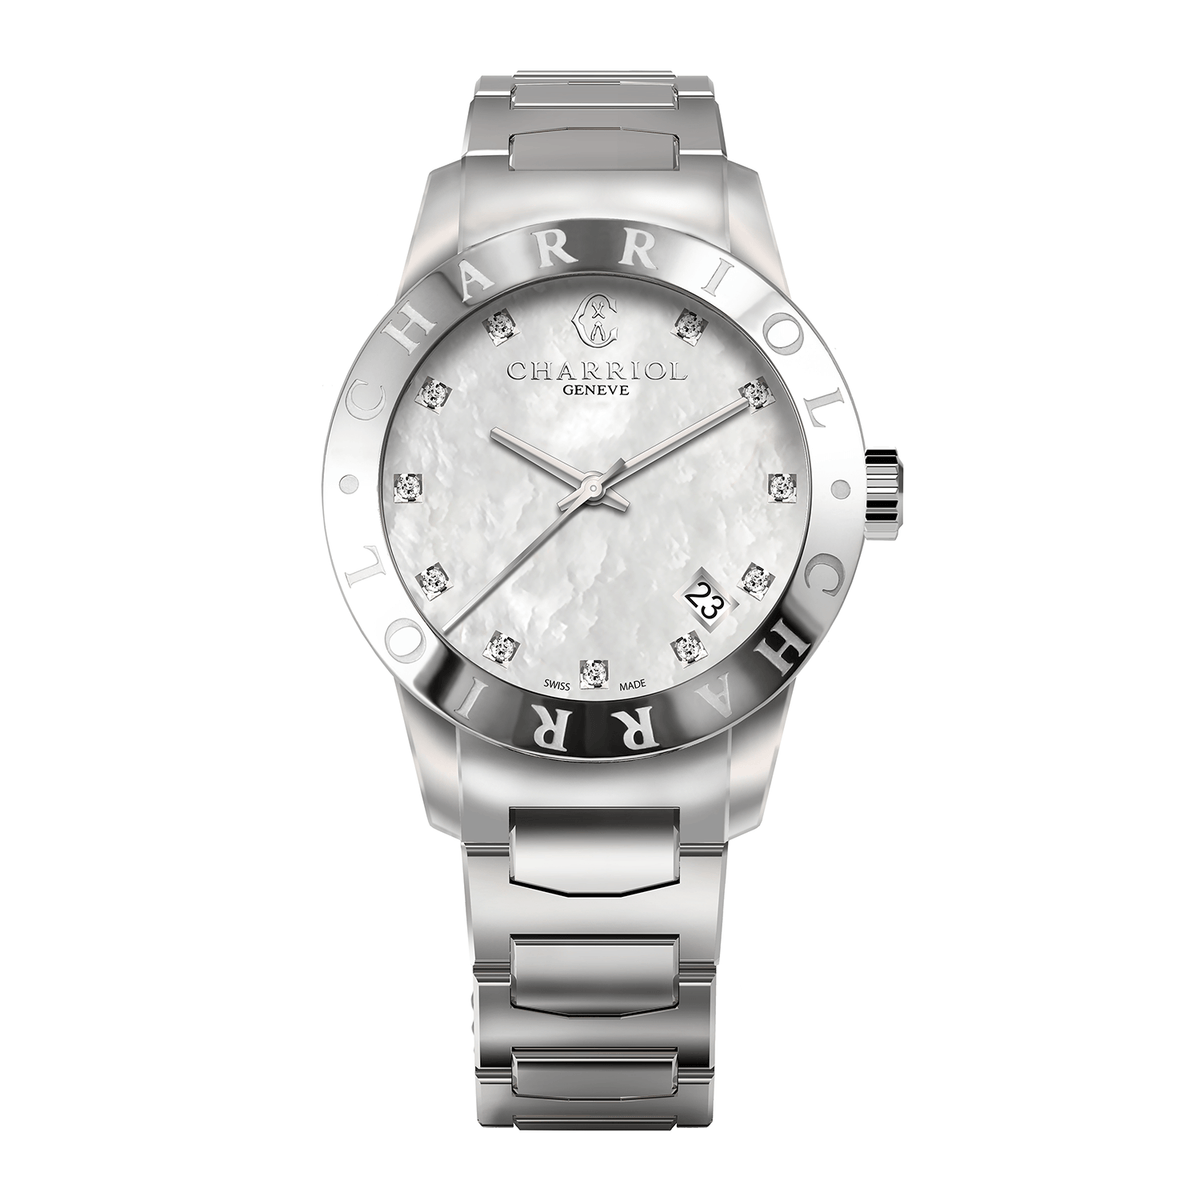 Alexandre C Watch White and Steel